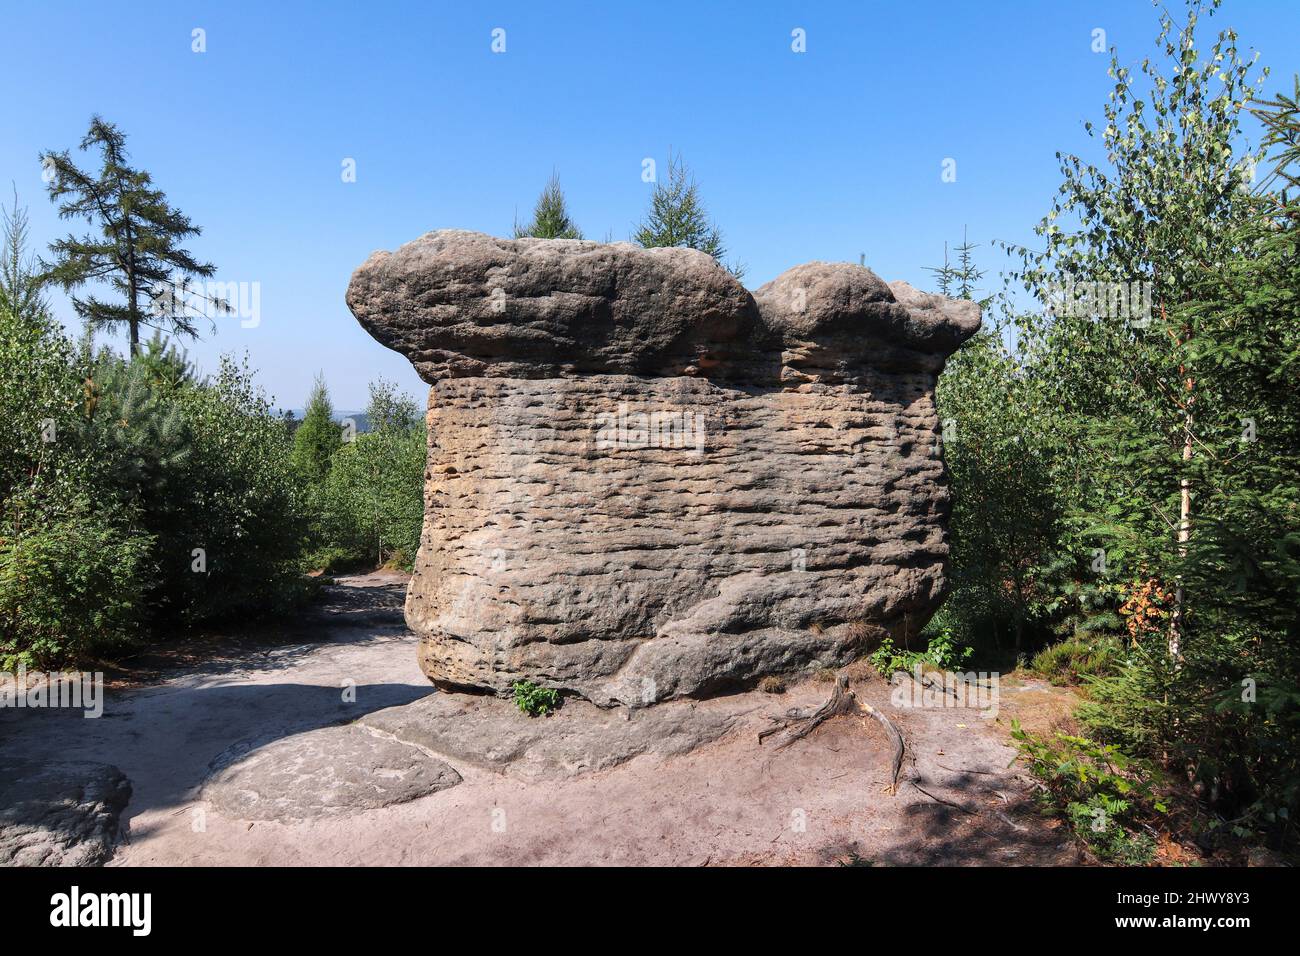 Stone Mushrooms - rock formation in Broumov Walls (Broumovske steny), mountain range and nature reserve, part of Table Mountains in Czech Republic Stock Photo